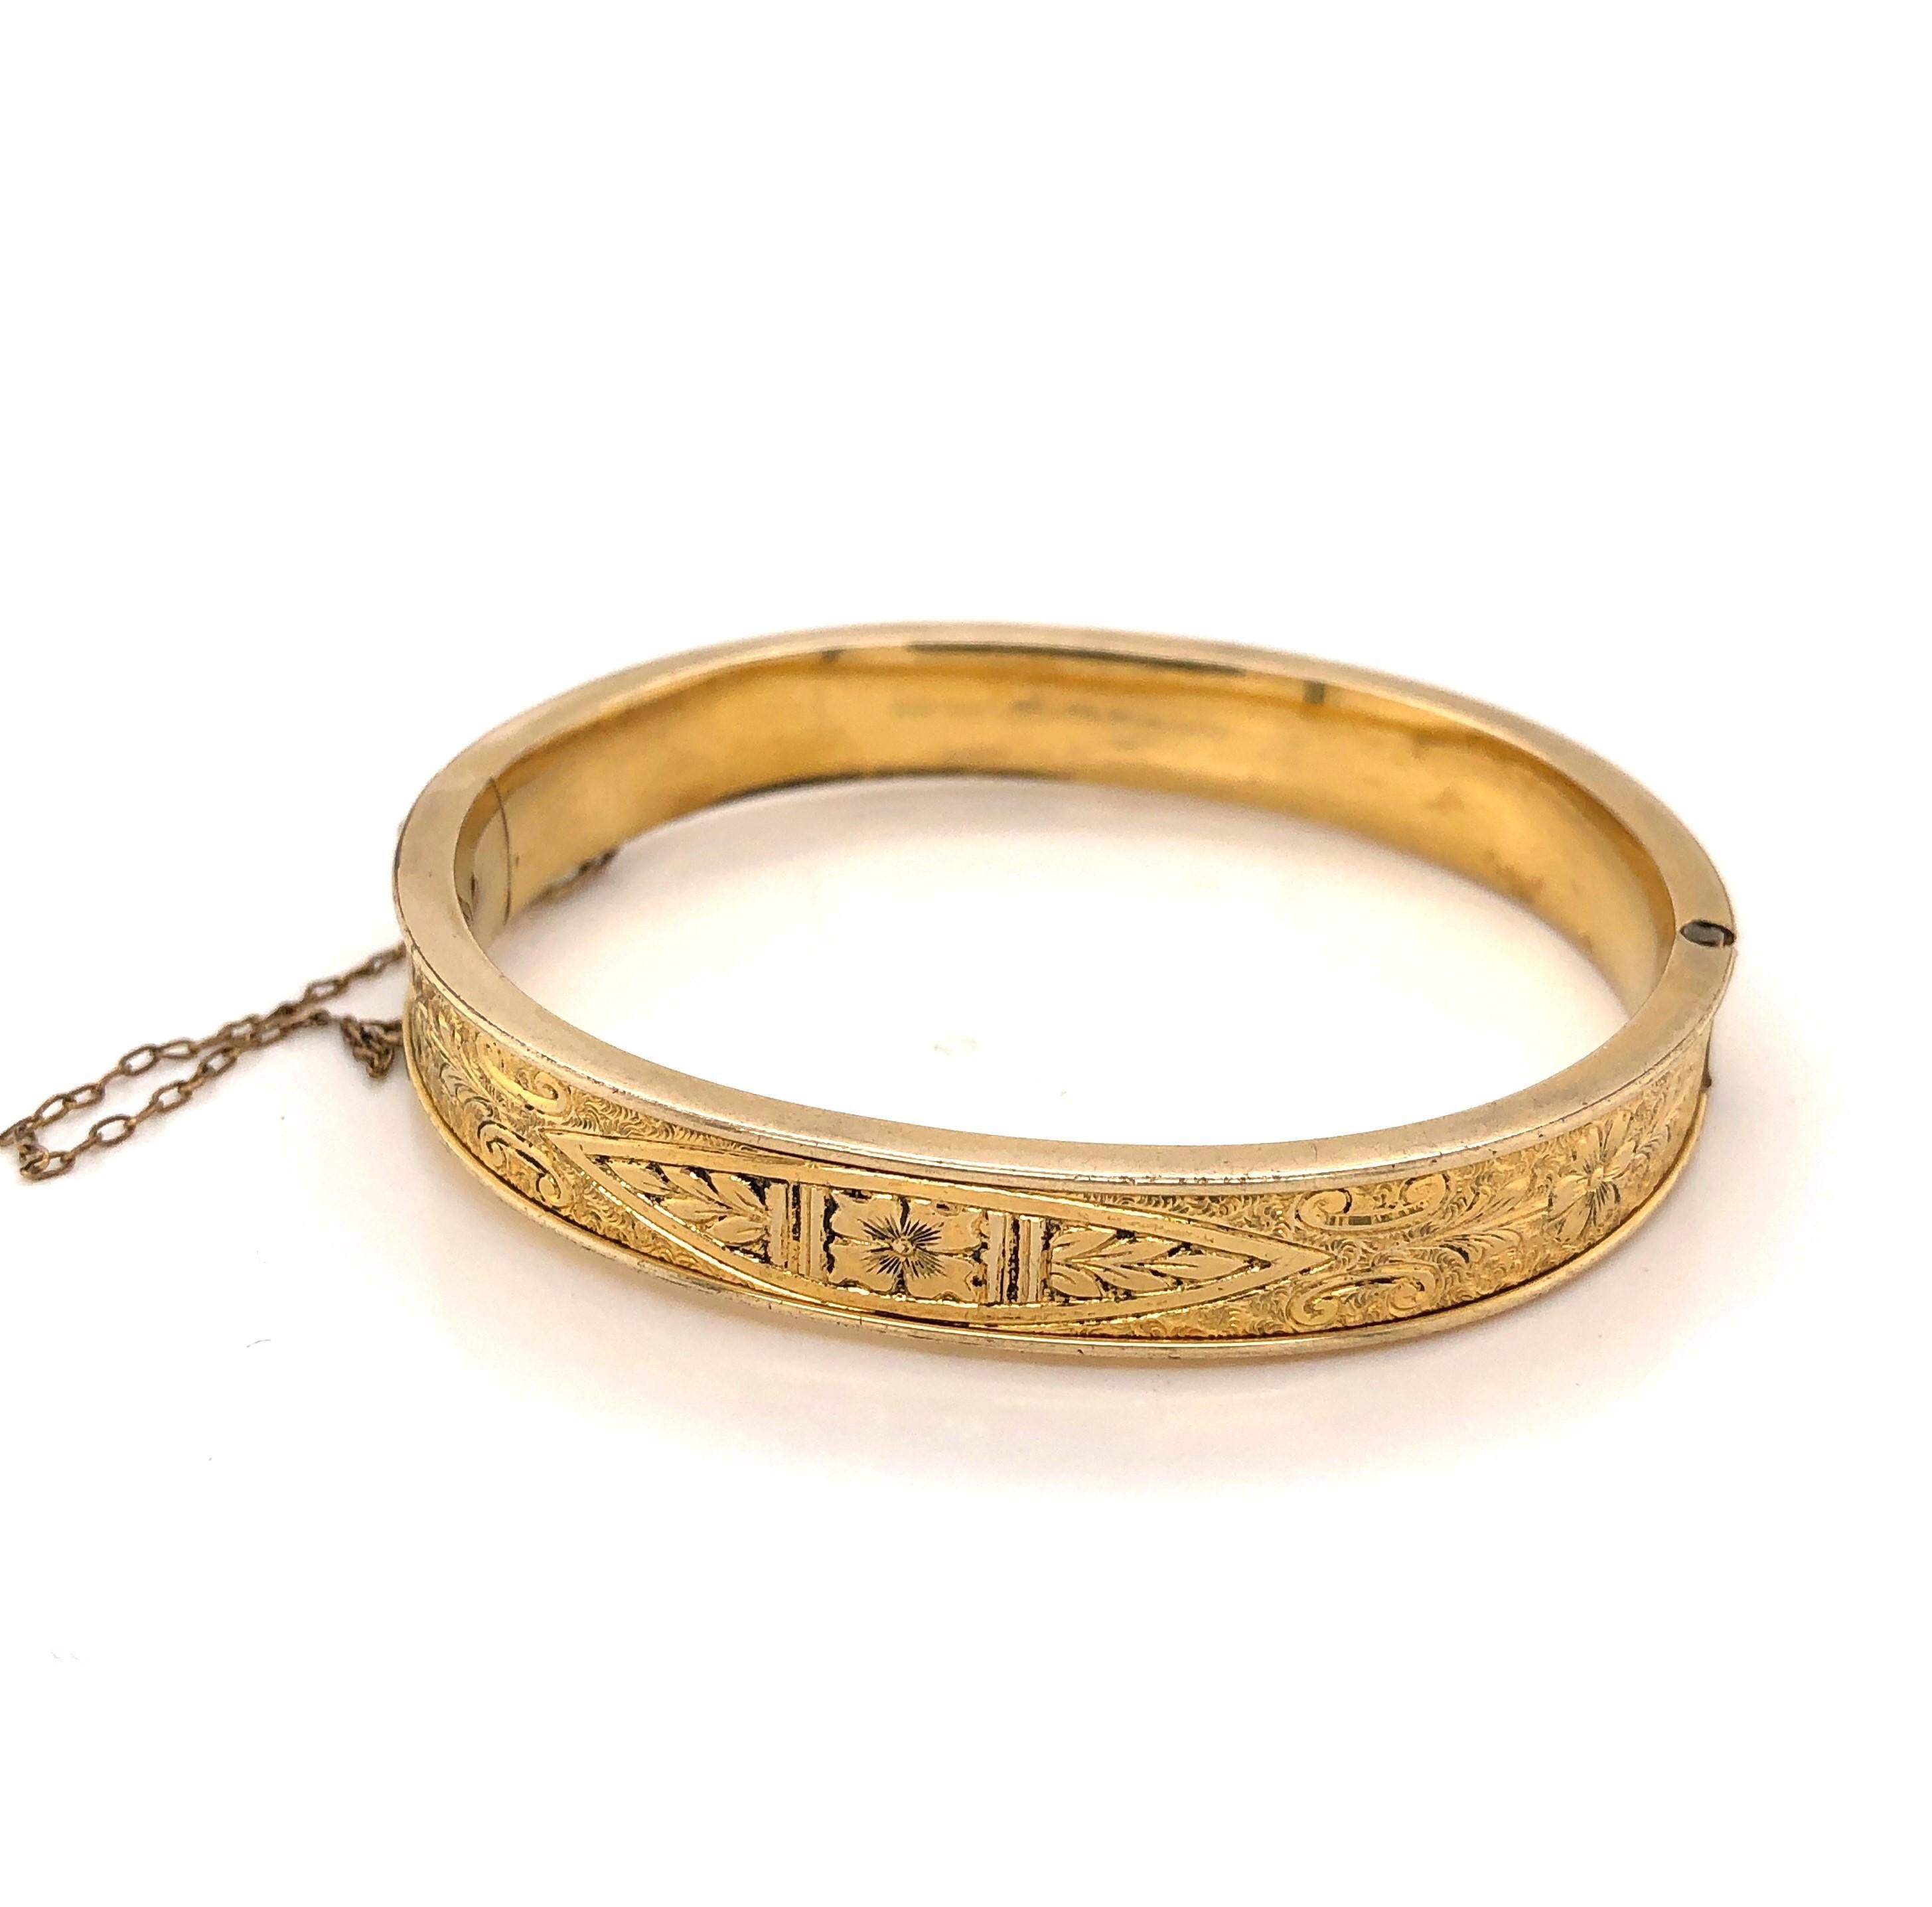 A special gift for the little lady in your life. Fancy pressed engraving decorates this darling ten carat gold filled bangle bracelet. The inside measurement is 2 x 13/4 inches and the width of the band is 1/4 inch. With hinge for wear, the piece is